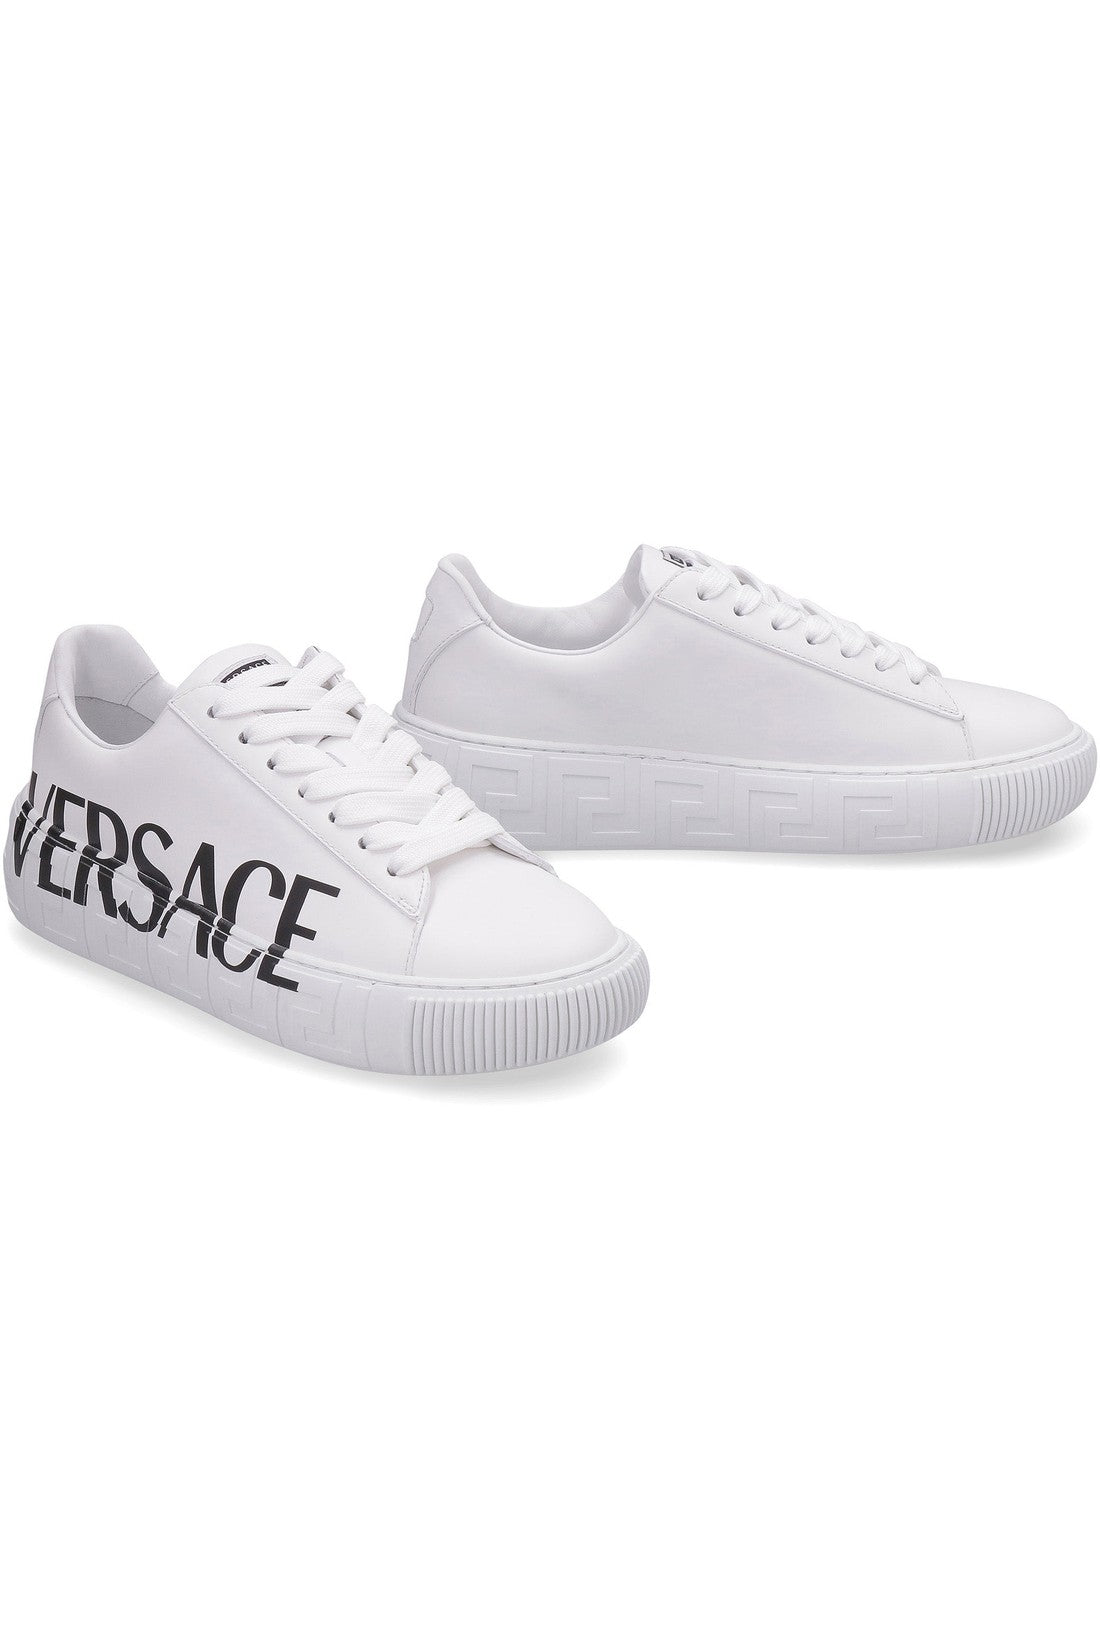 Versace-OUTLET-SALE-Greca leather low-top sneakers-ARCHIVIST